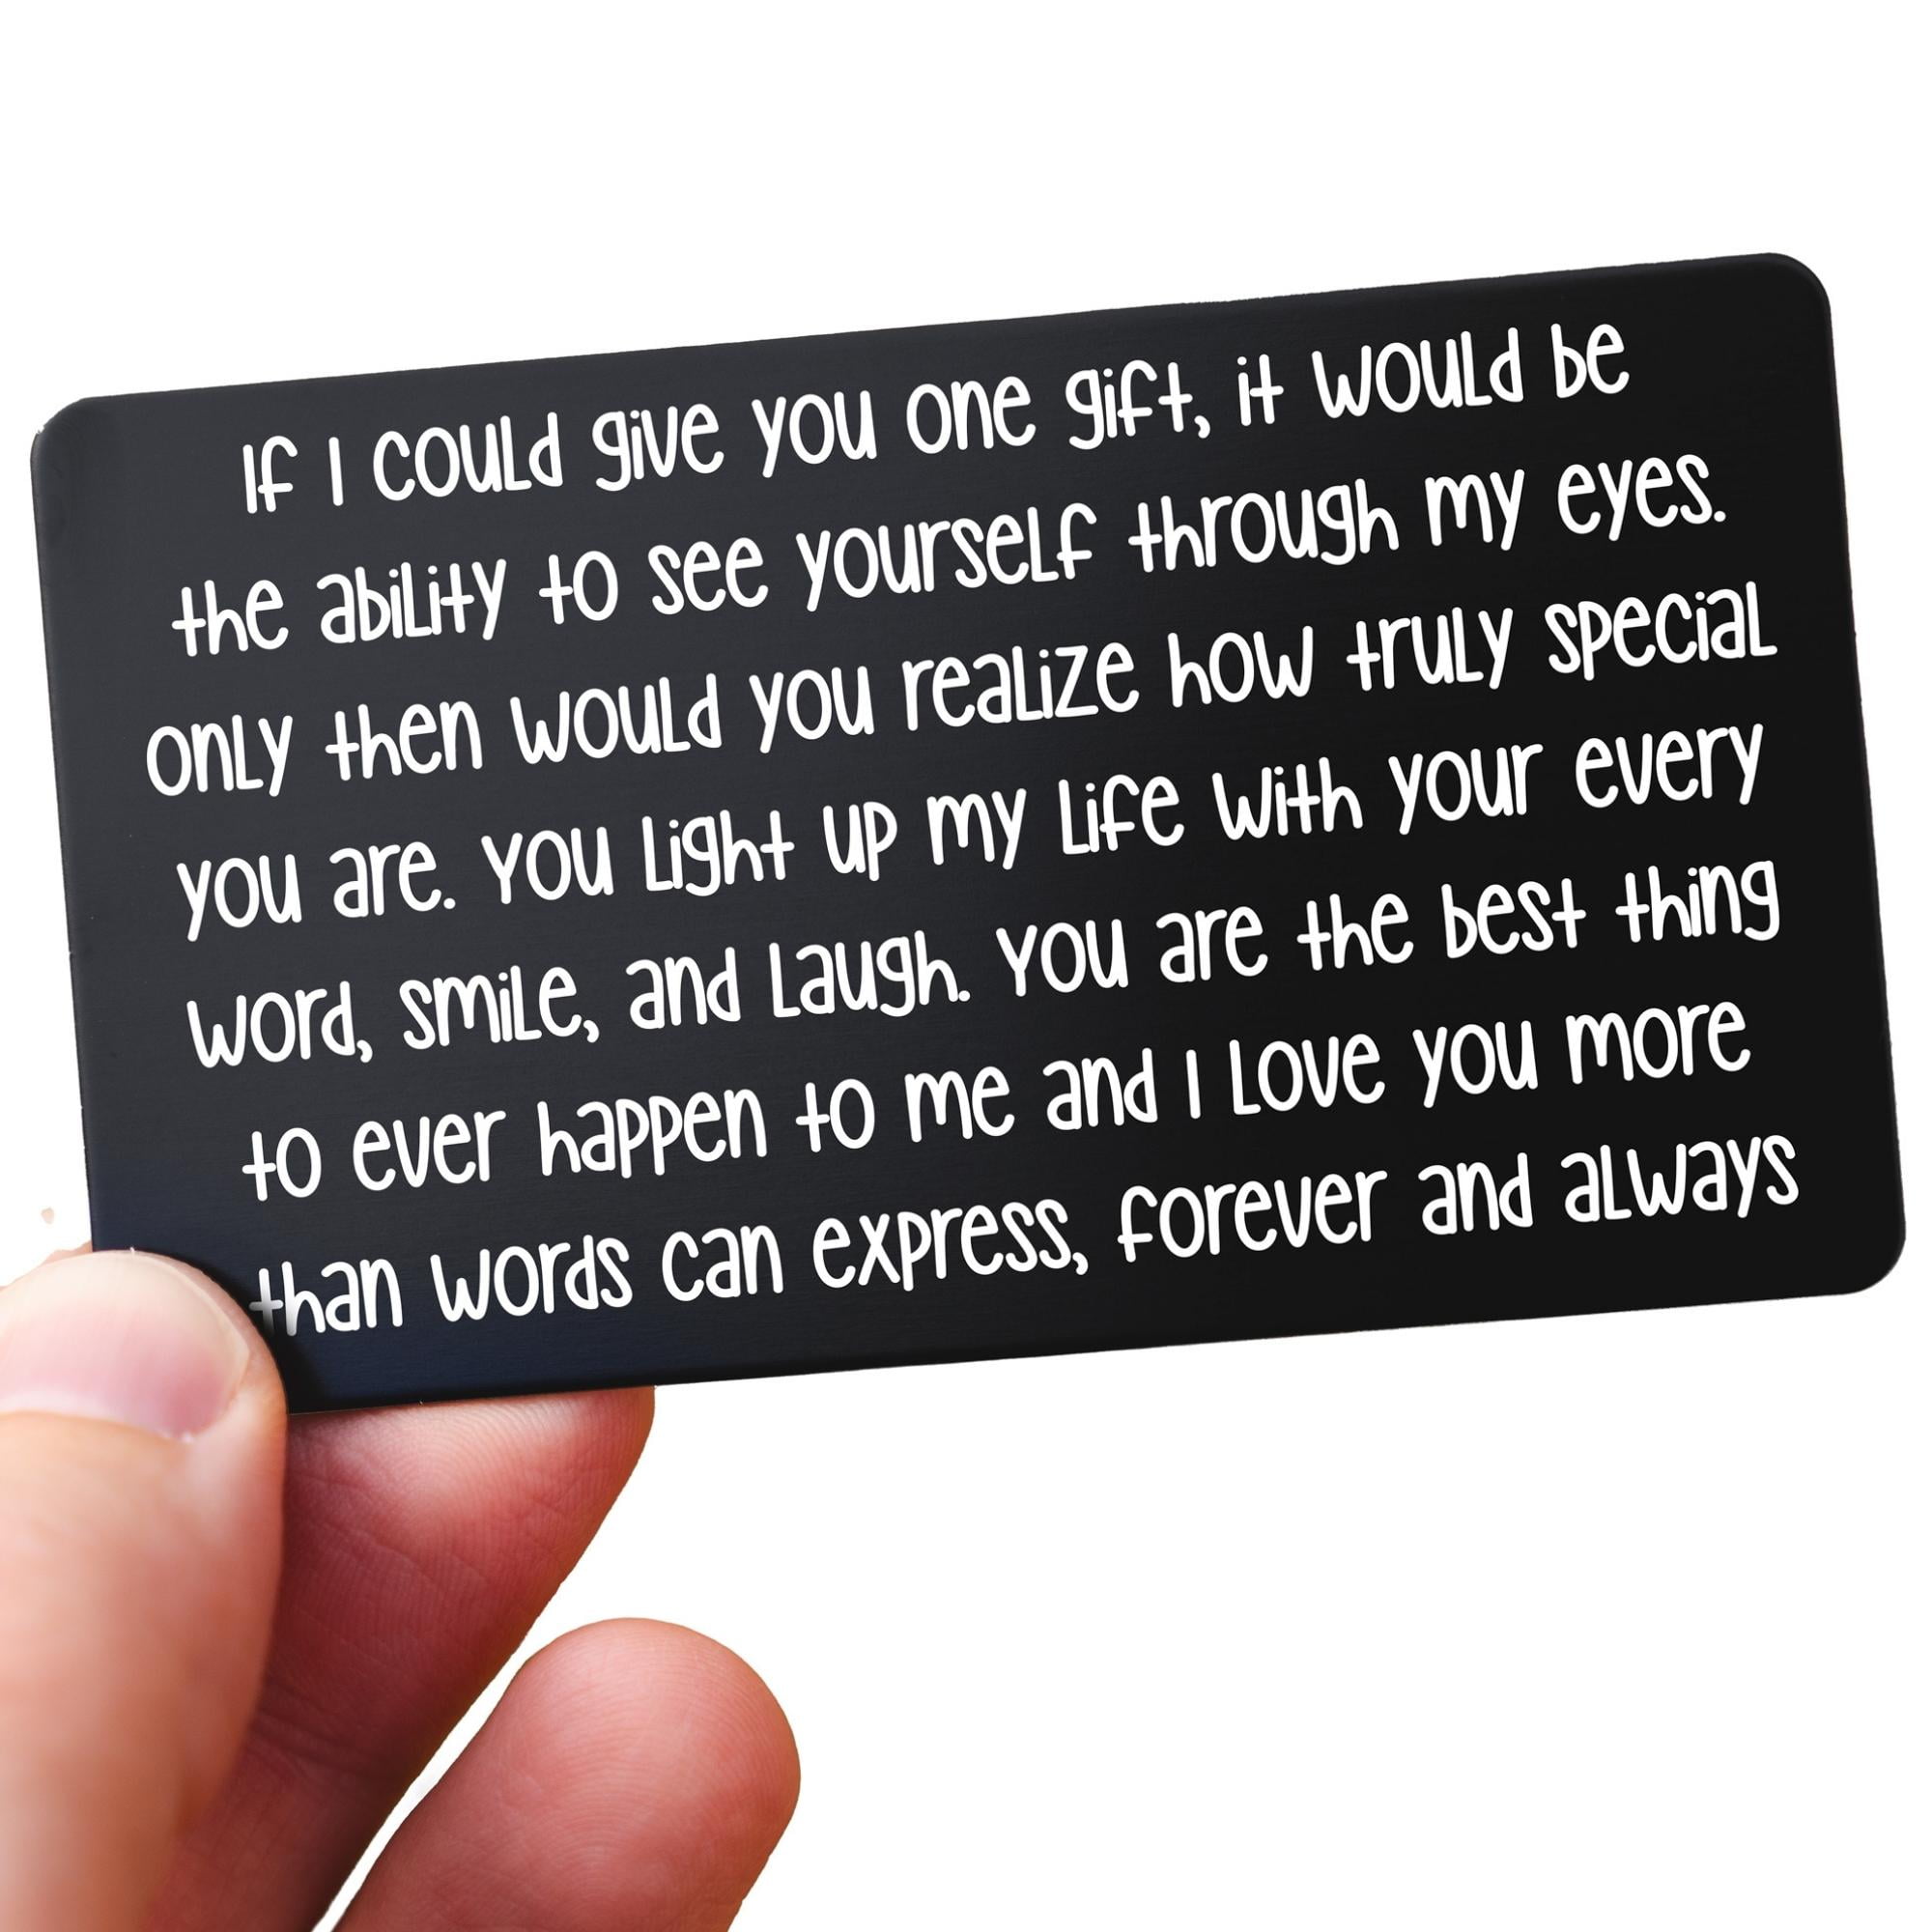  Wallet Card Love Note, Husband Wallet Card from Wife, Gift for  Boyfriend, Hubby, Long Distance Boyfriend Gift Ideas, Romantic Gift for  Him, I Love You Gift Cards for Him, Valentines Day